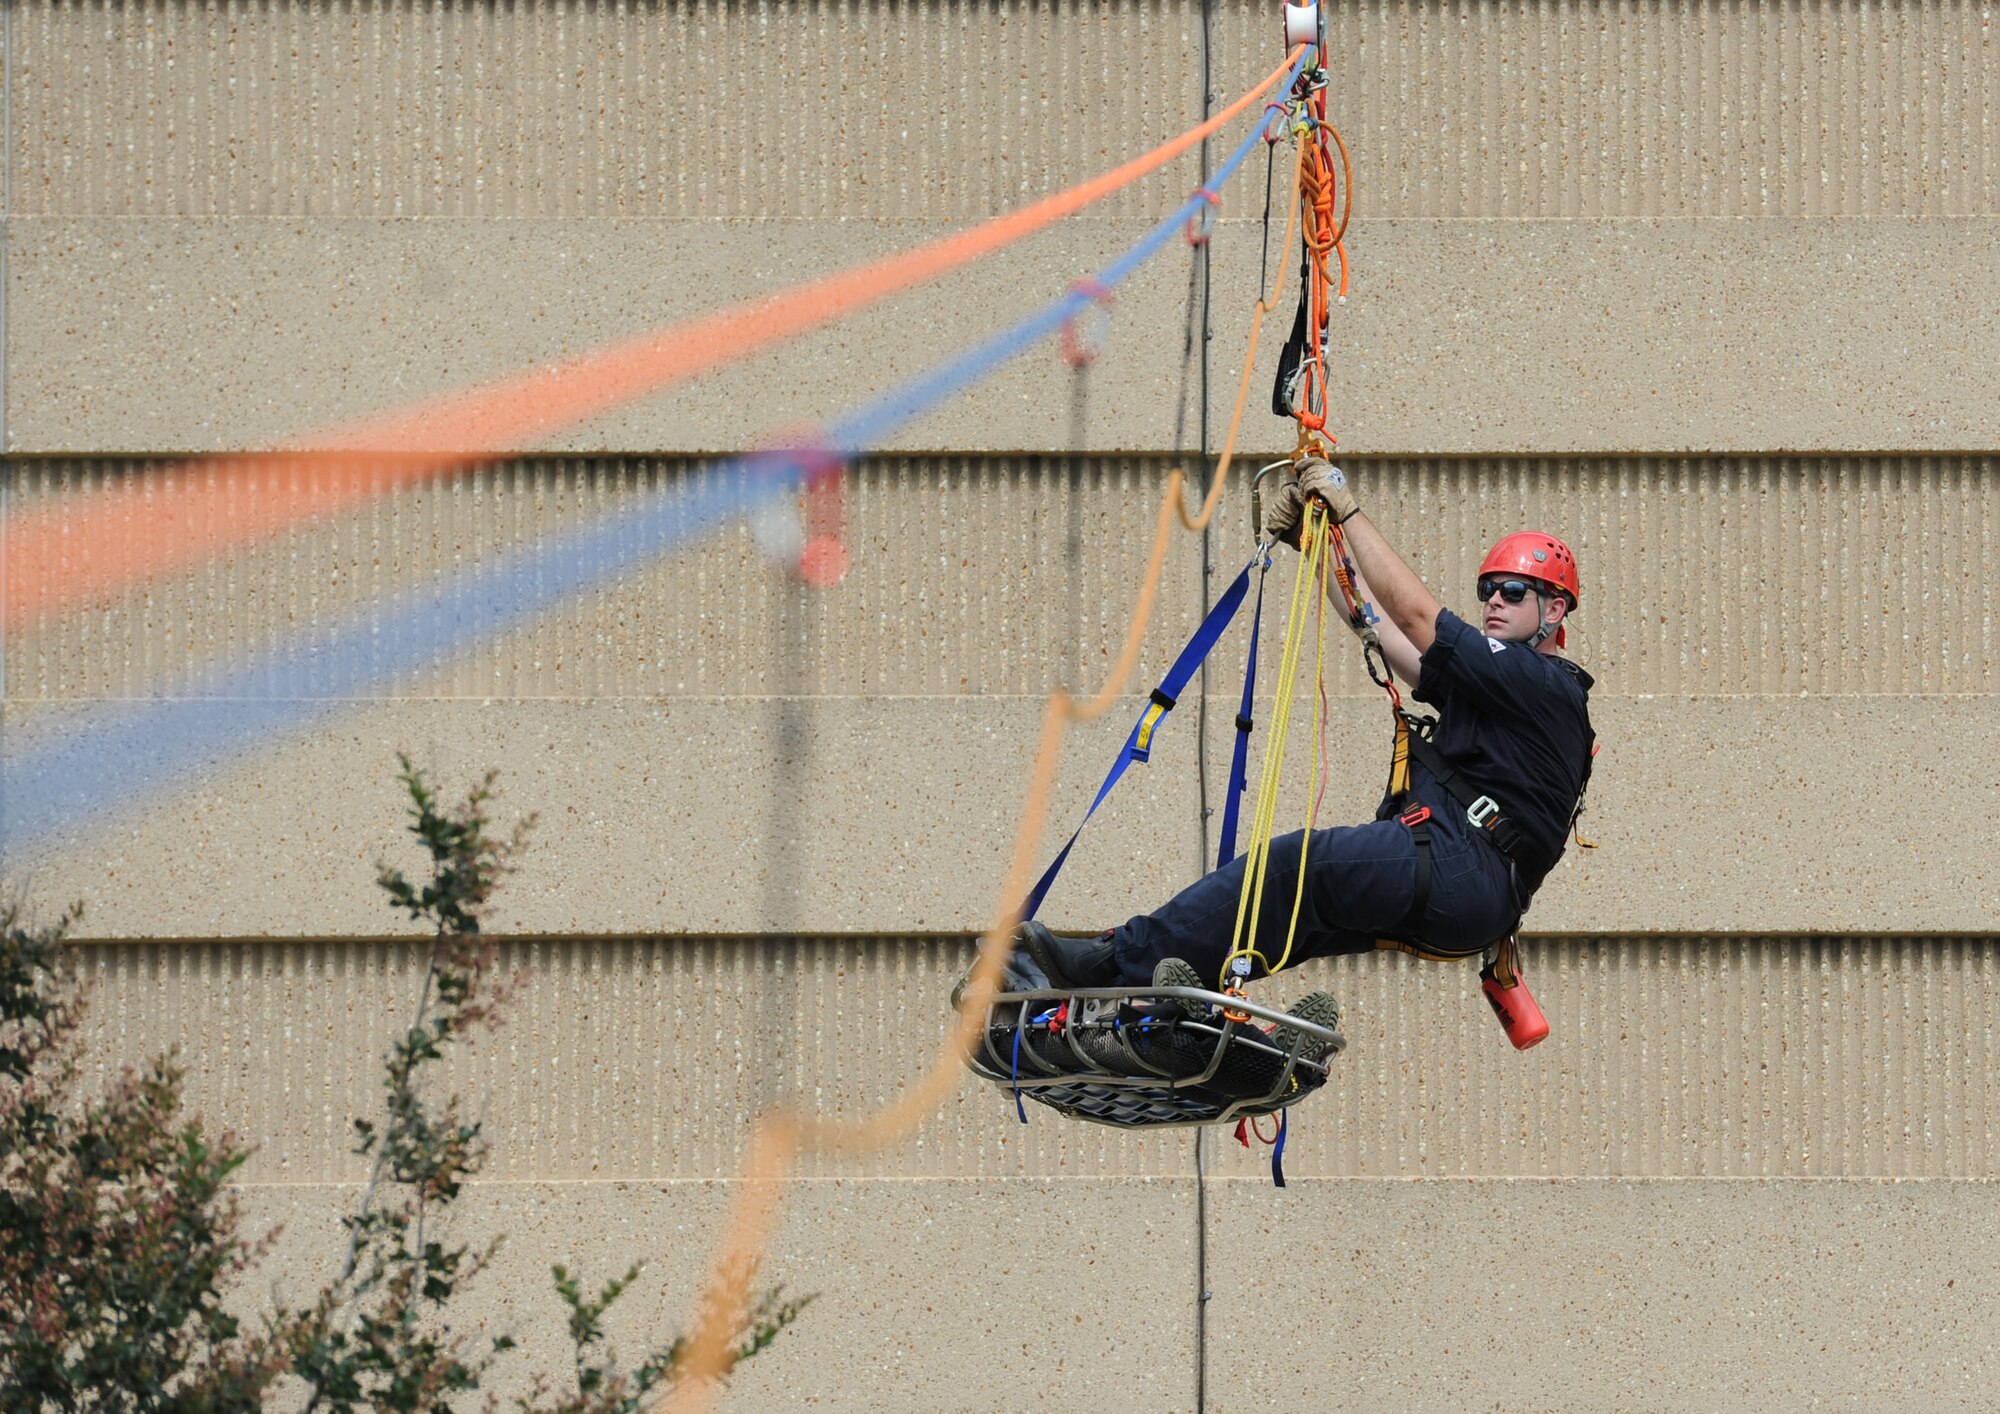 Robert Hornsby, Biloxi Firefighter, balances himself while being raised from the bottom of the Weather Training Complex with a “victim” during rope rescue operations training June 14, 2017, on Keesler Air Force Base, Miss. Keesler hosted the advanced rescue certification training course, which consisted of confined space rescue, high and low angle rescue and stokes basket rescue operations, for Keesler and Biloxi Firefighters. (U.S. Air Force photo by Kemberly Groue)